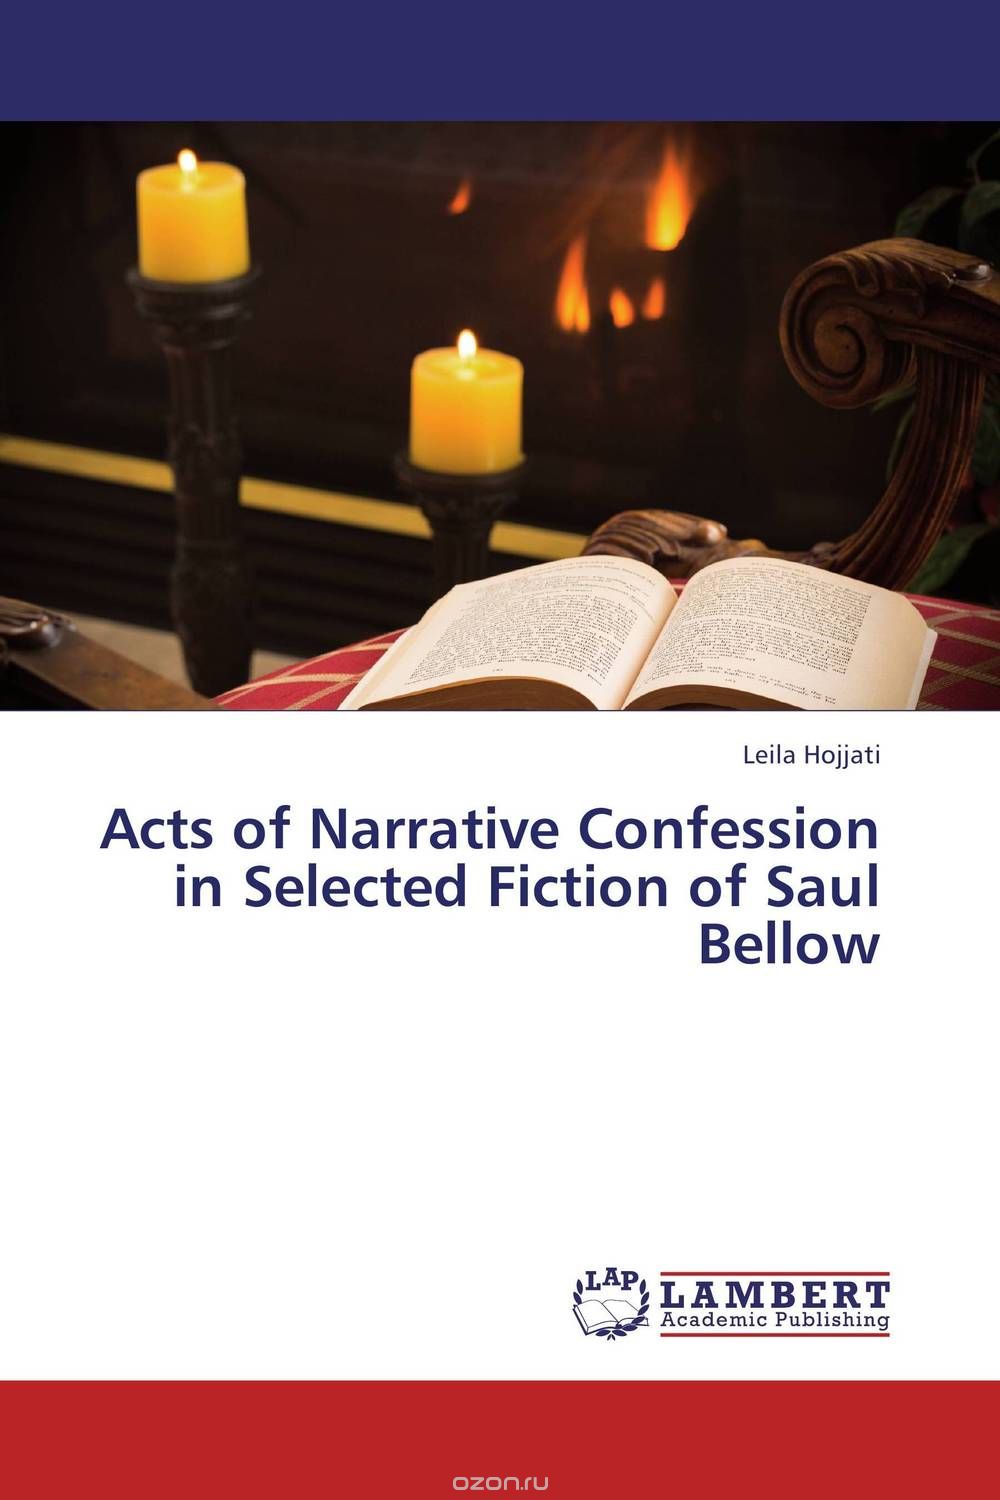 Скачать книгу "Acts of Narrative Confession in Selected Fiction of Saul Bellow"